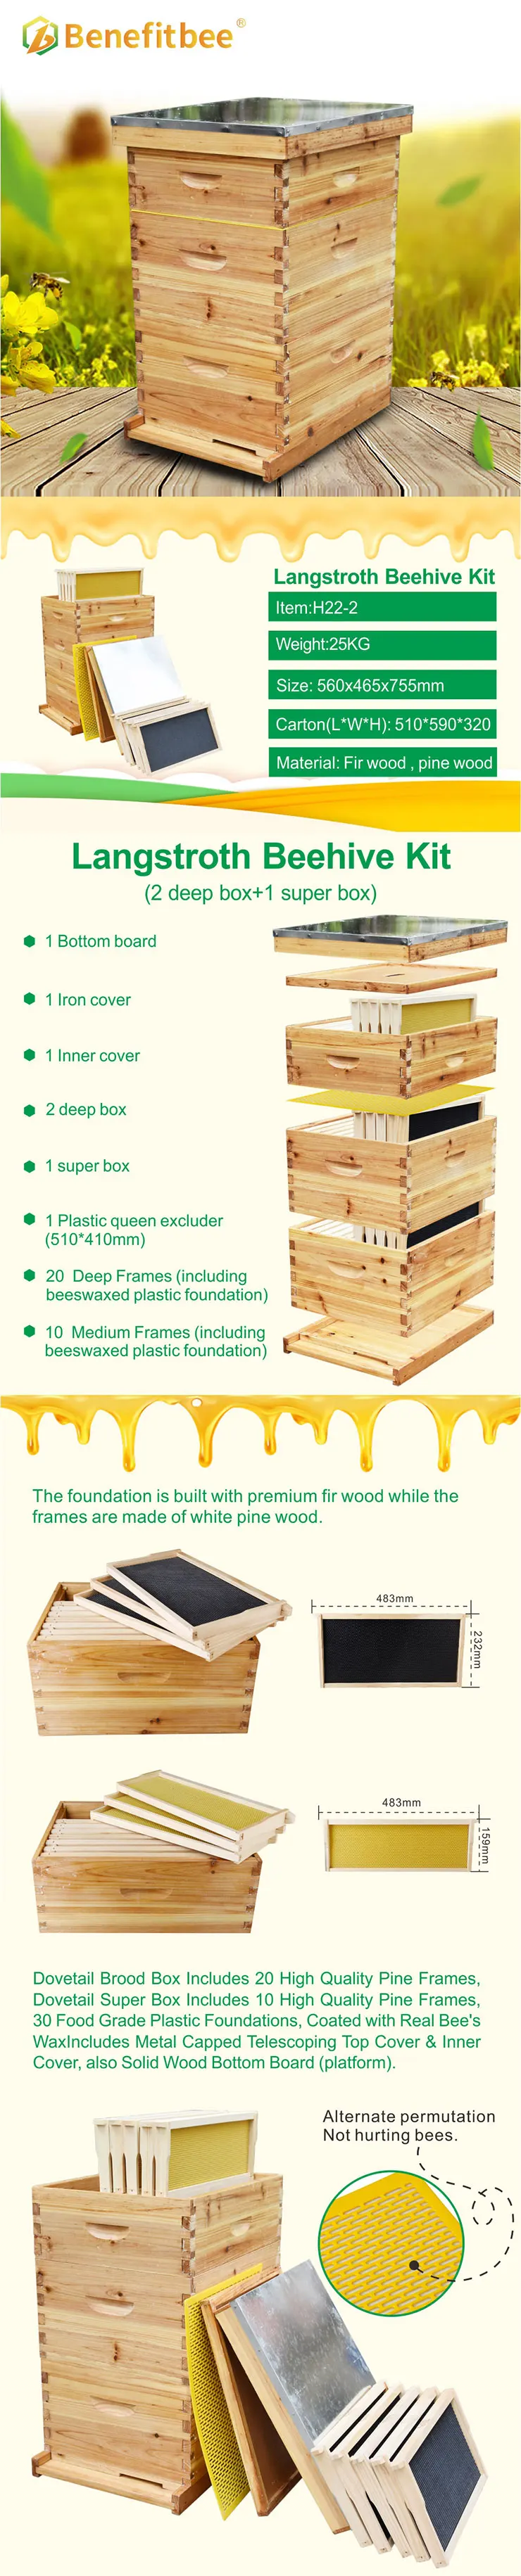 Benefitbee Langstroth Beehive Kit bee hives complete beekeeping bee hive kit with 10 frames